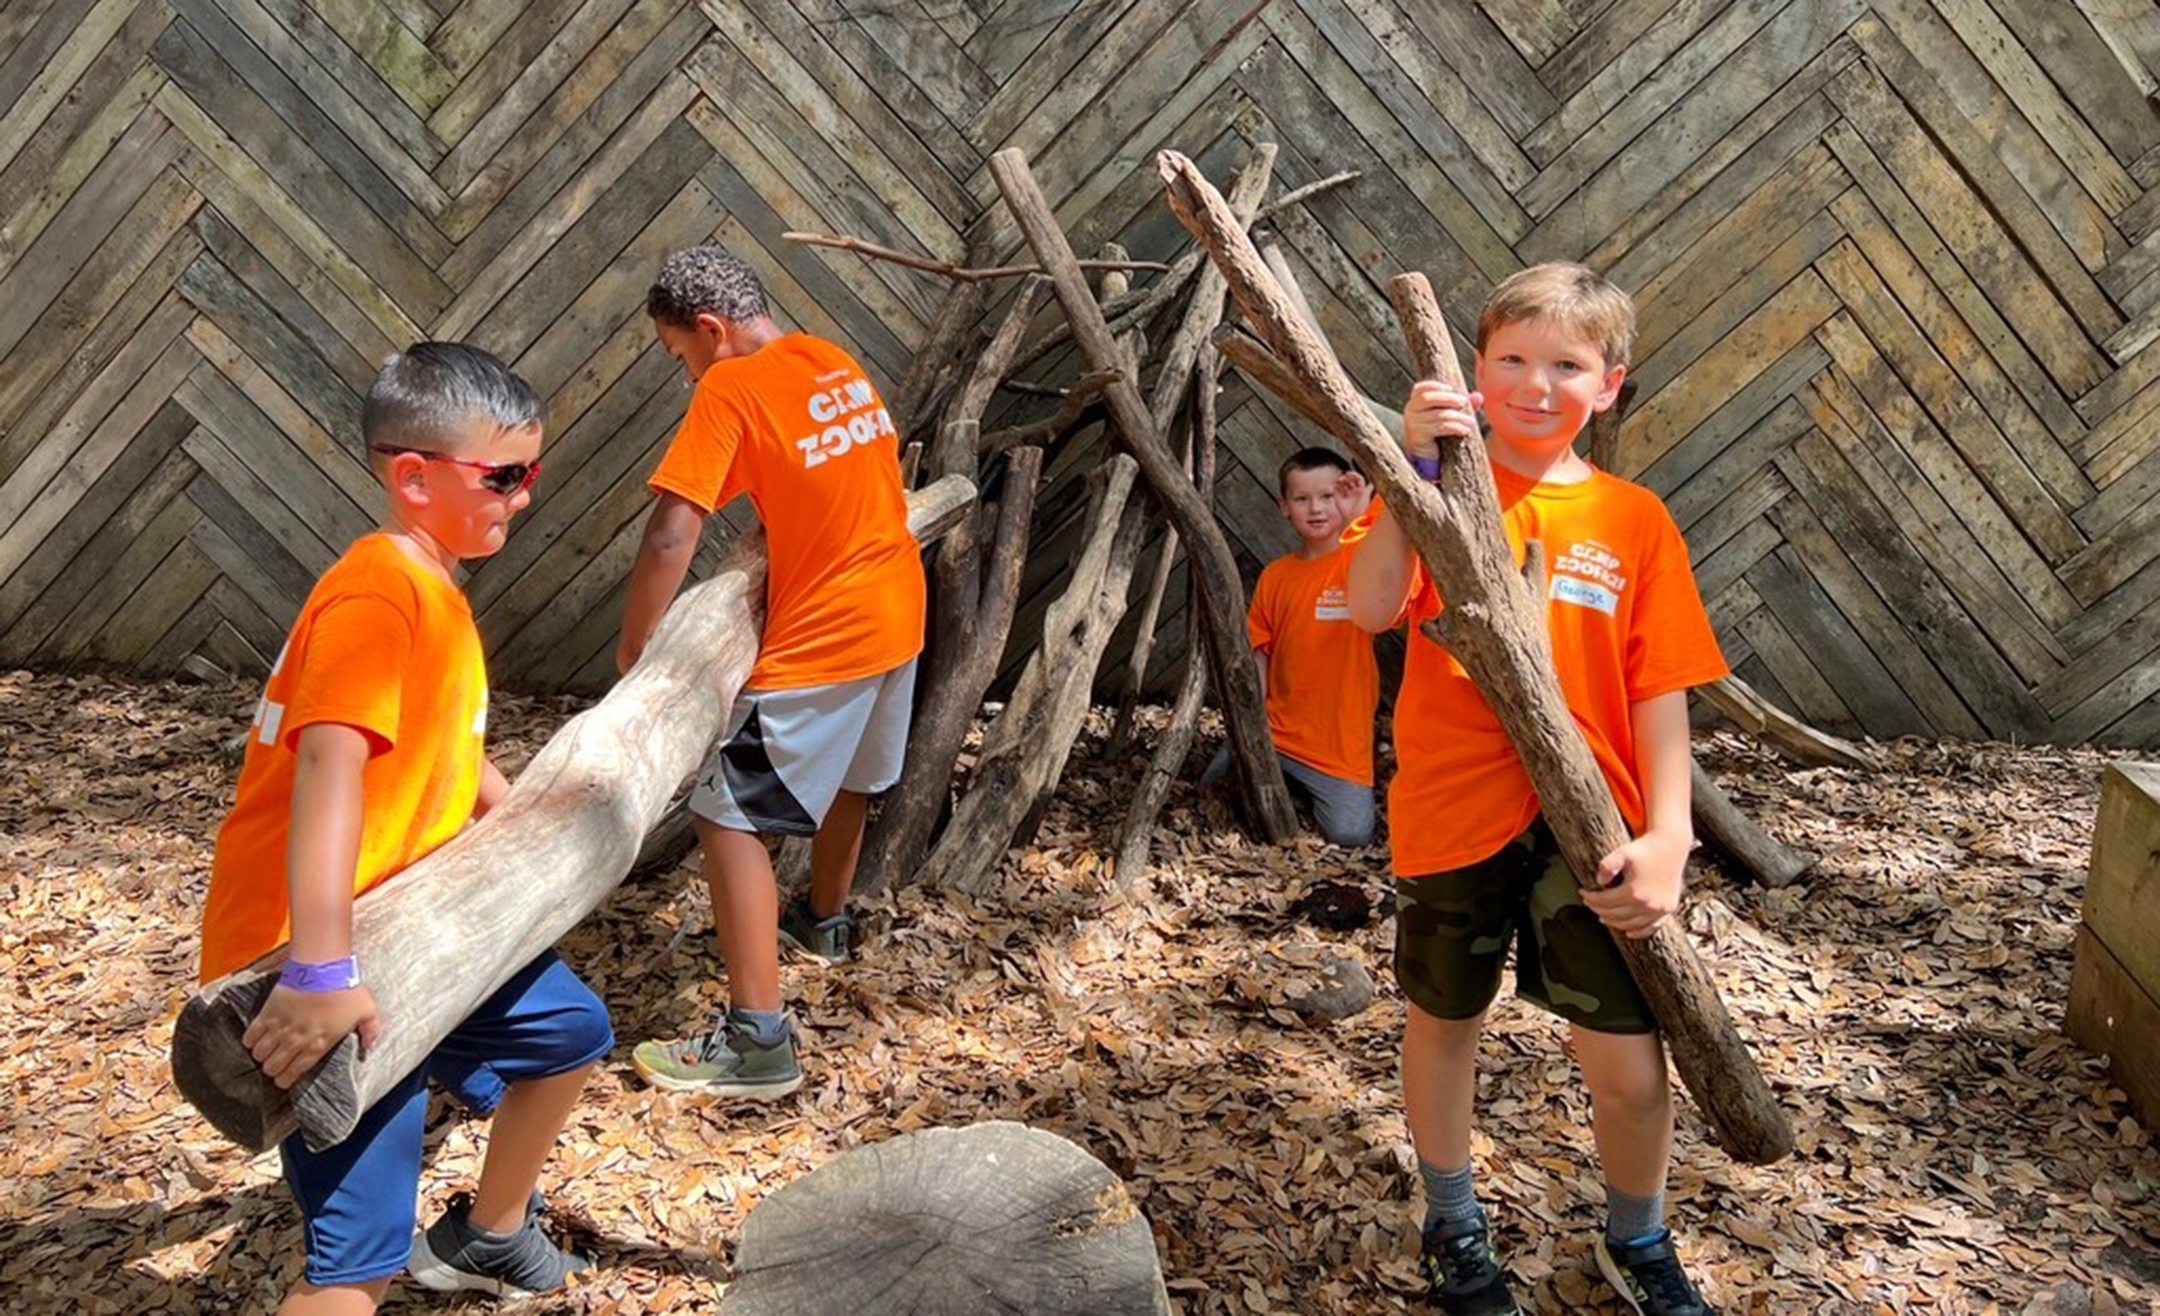 Four boys in orange shirts lift large tree trunks and twigs at an outdoor summer camp